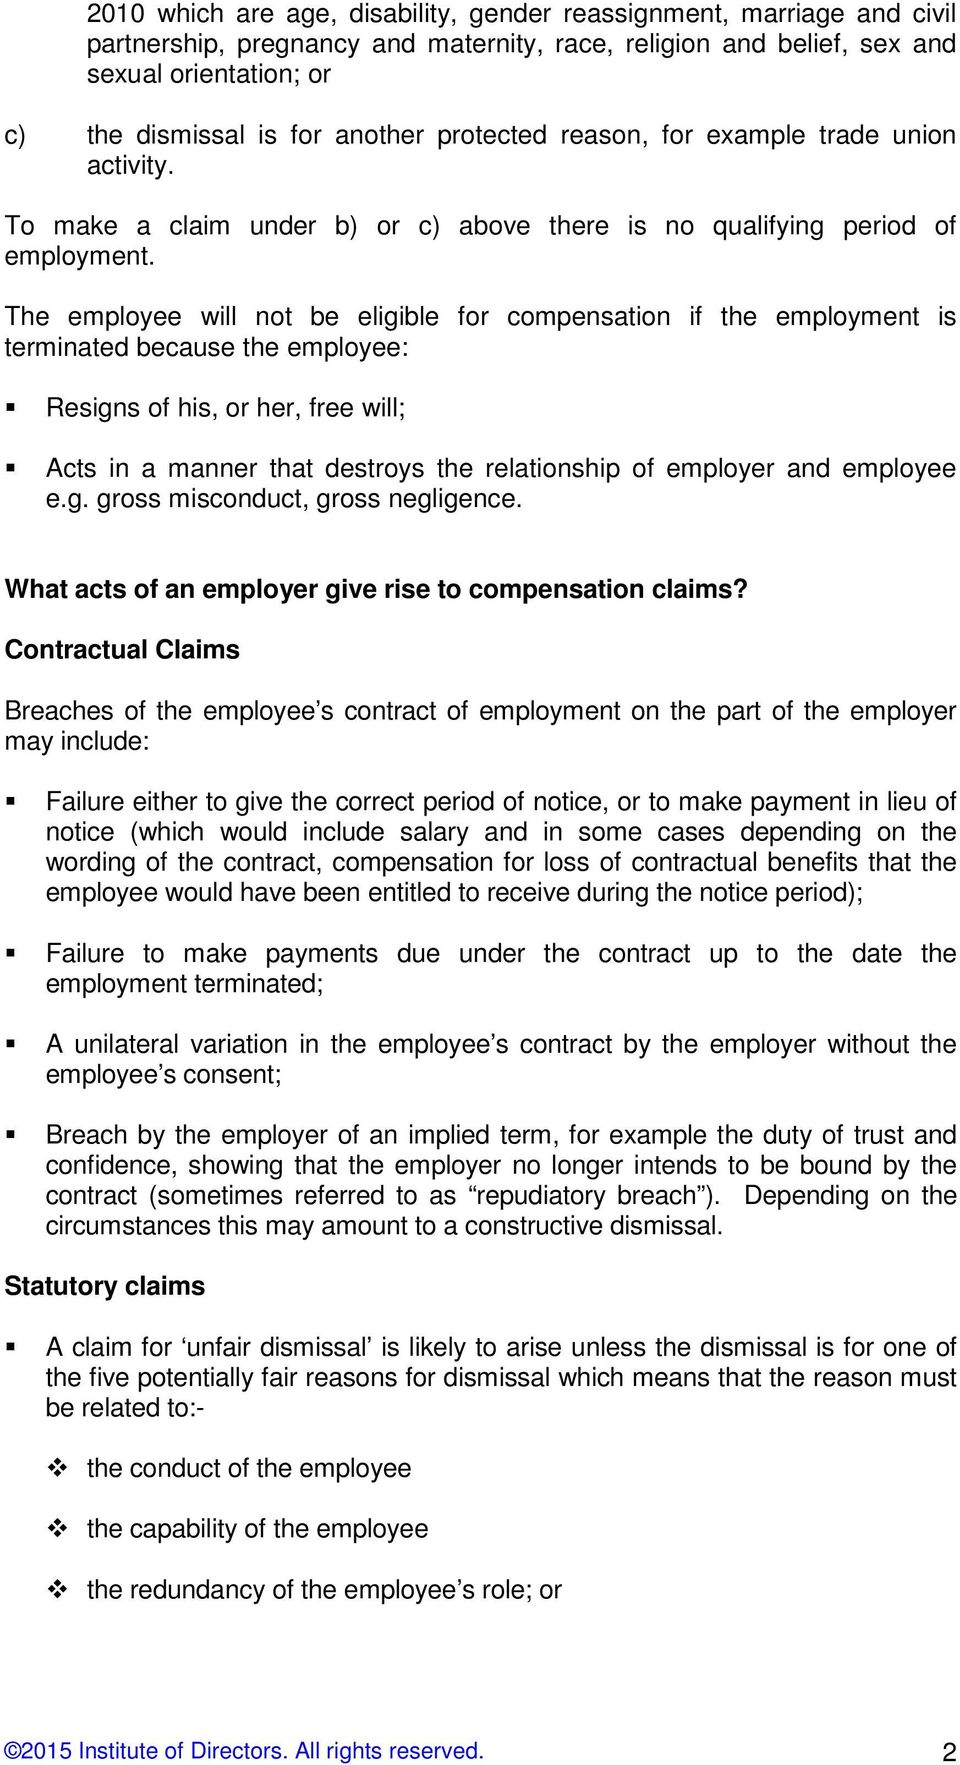 The employee will not be eligible for compensation if the employment is terminated because the employee: Resigns of his, or her, free will; Acts in a manner that destroys the relationship of employer